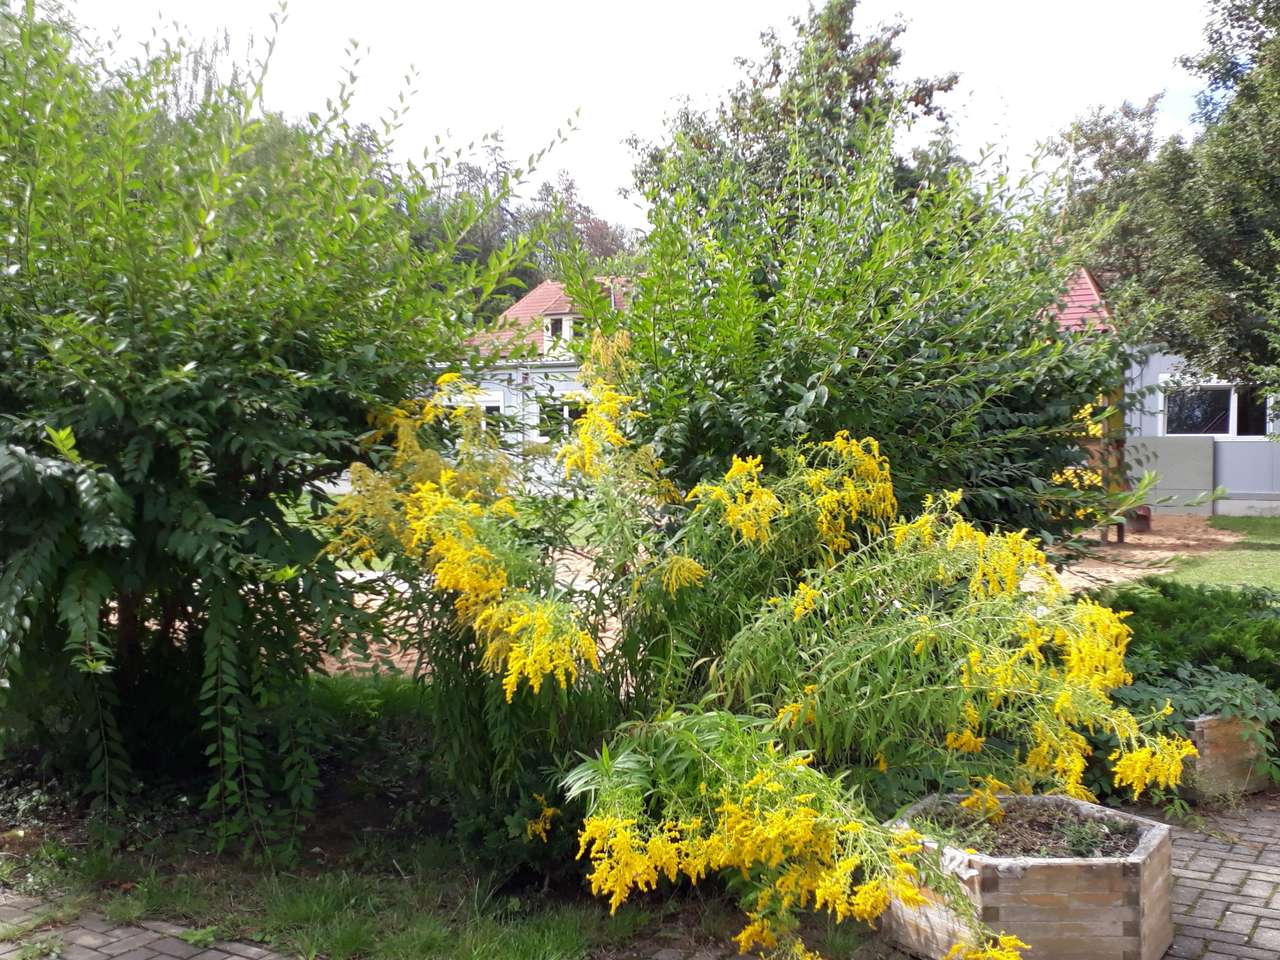 Goldenrod in September puzzle online from photo